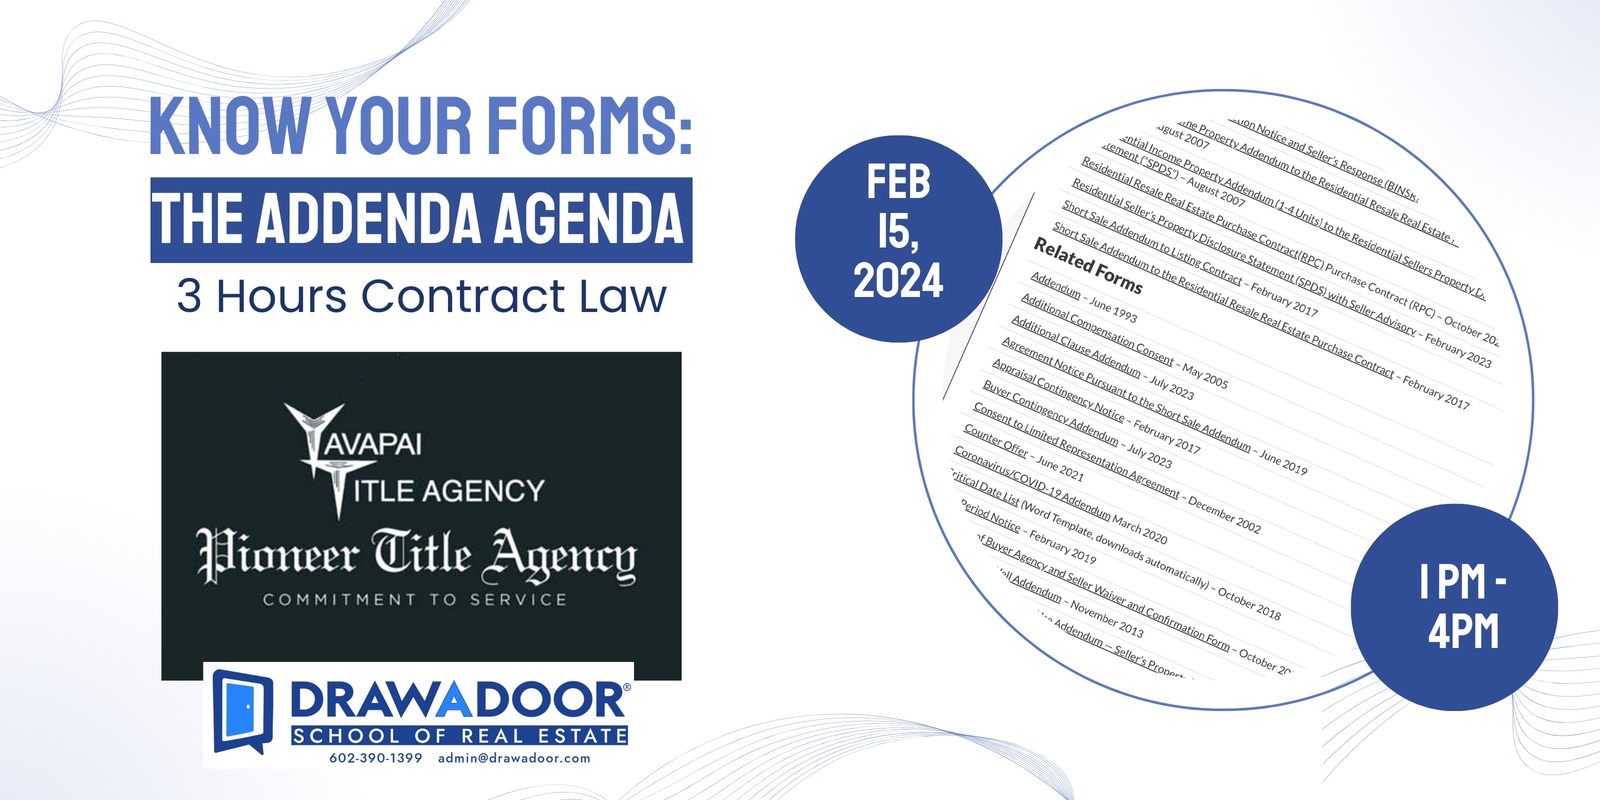 Banner image for Know Your Forms: the Addenda Agenda - 3 Hours Contract Law- Feb 15, 2024 1PM - 4PM